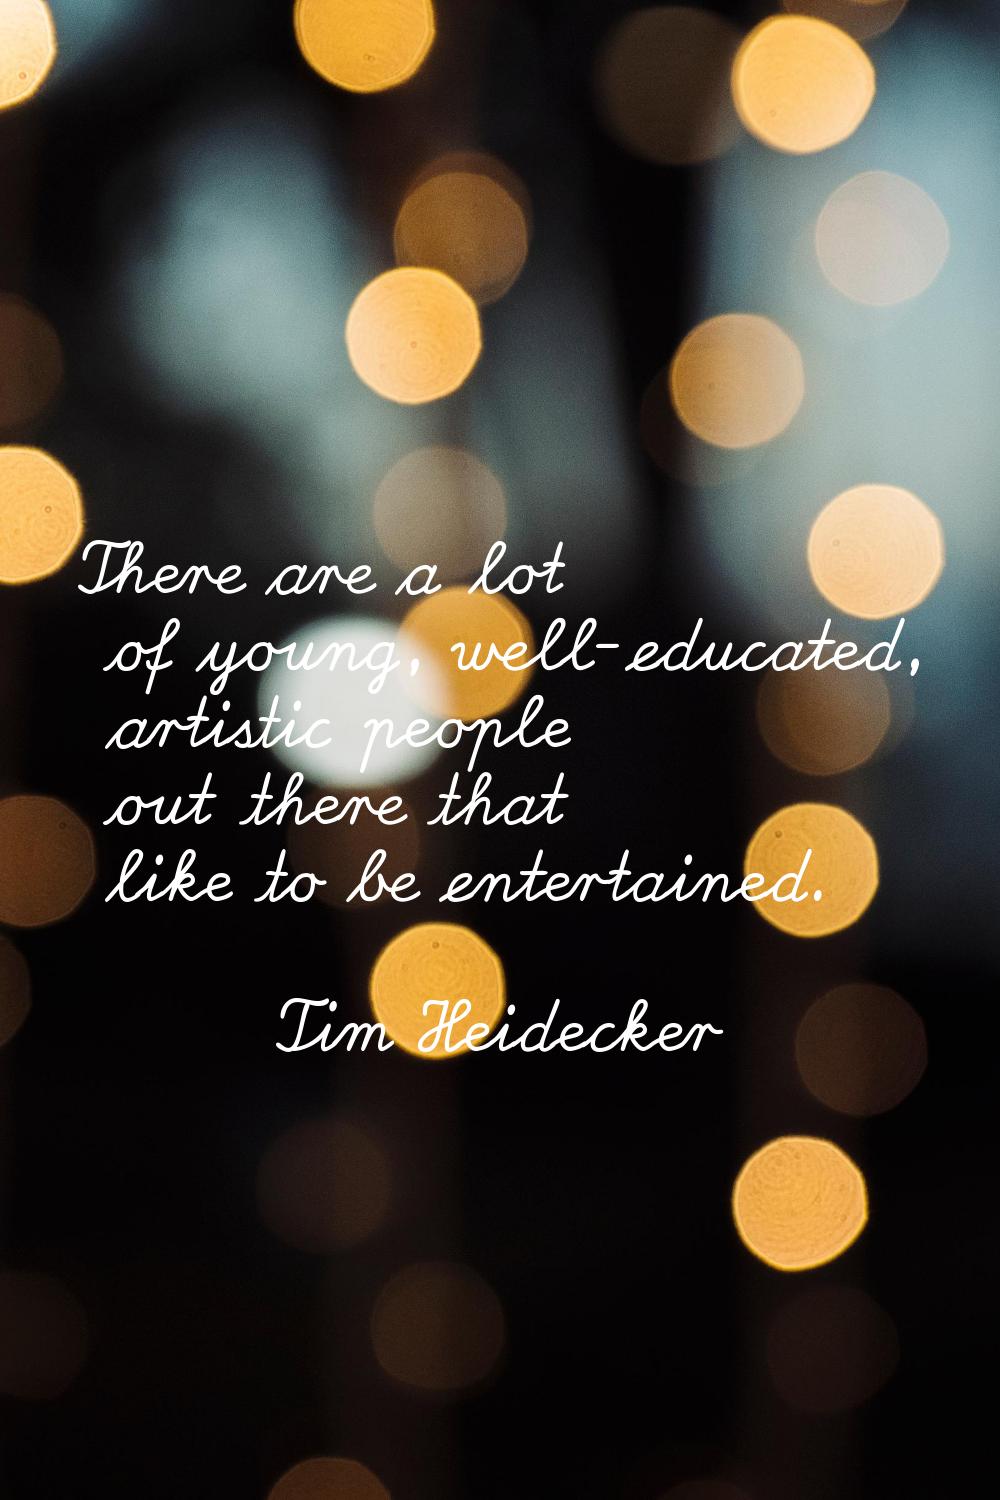 There are a lot of young, well-educated, artistic people out there that like to be entertained.